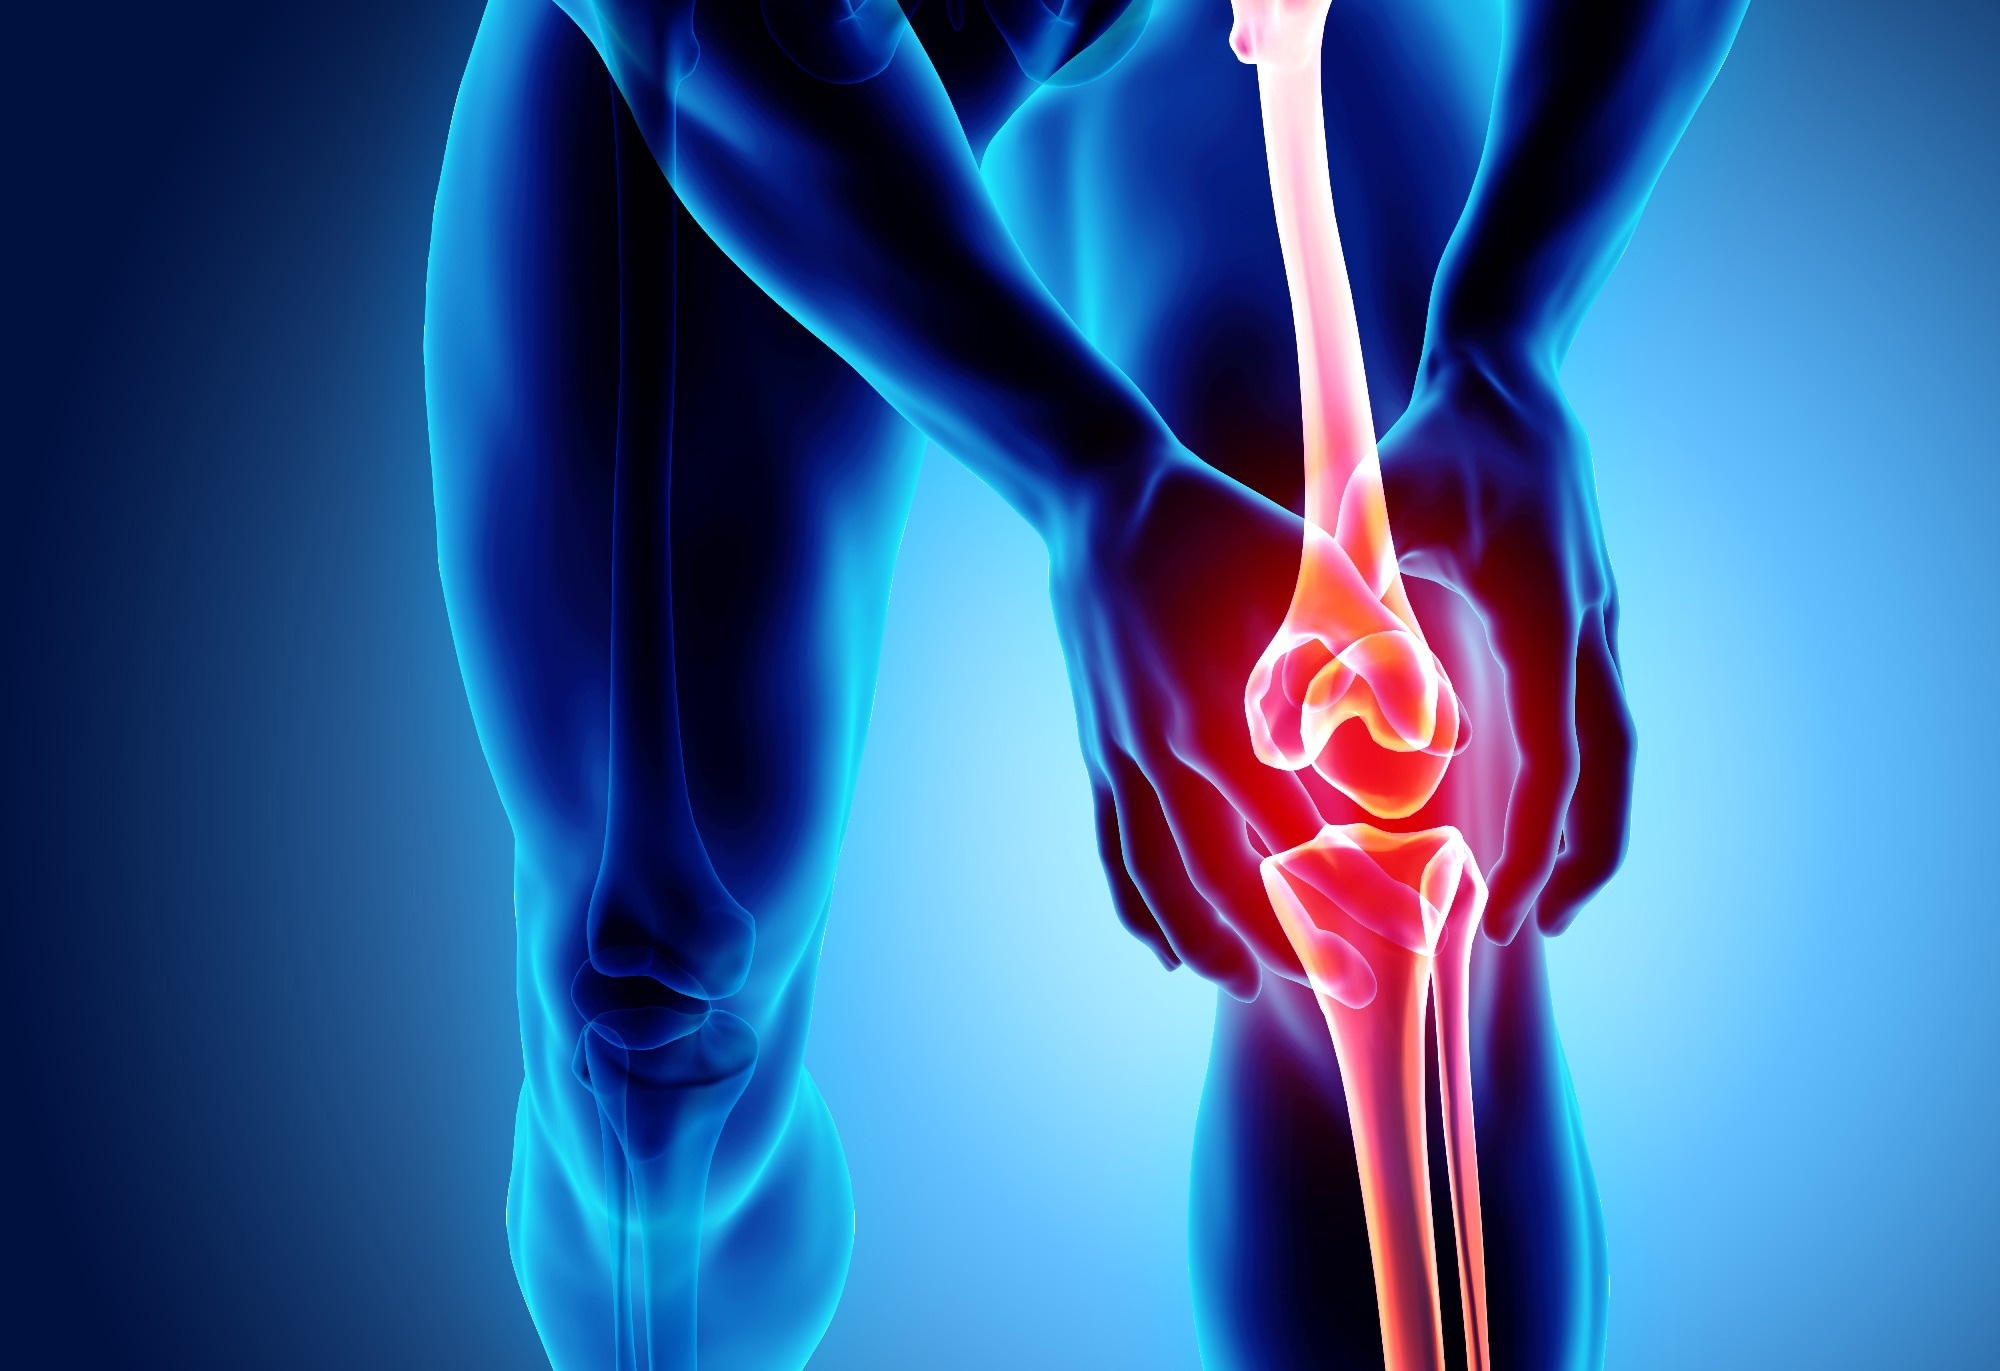 Study: An injectable copolymer of fatty acids (ARA 3000 BETA) as a promising treatment for osteoarthritis. Image Credit: MDGRPHCS/Shutterstock.com